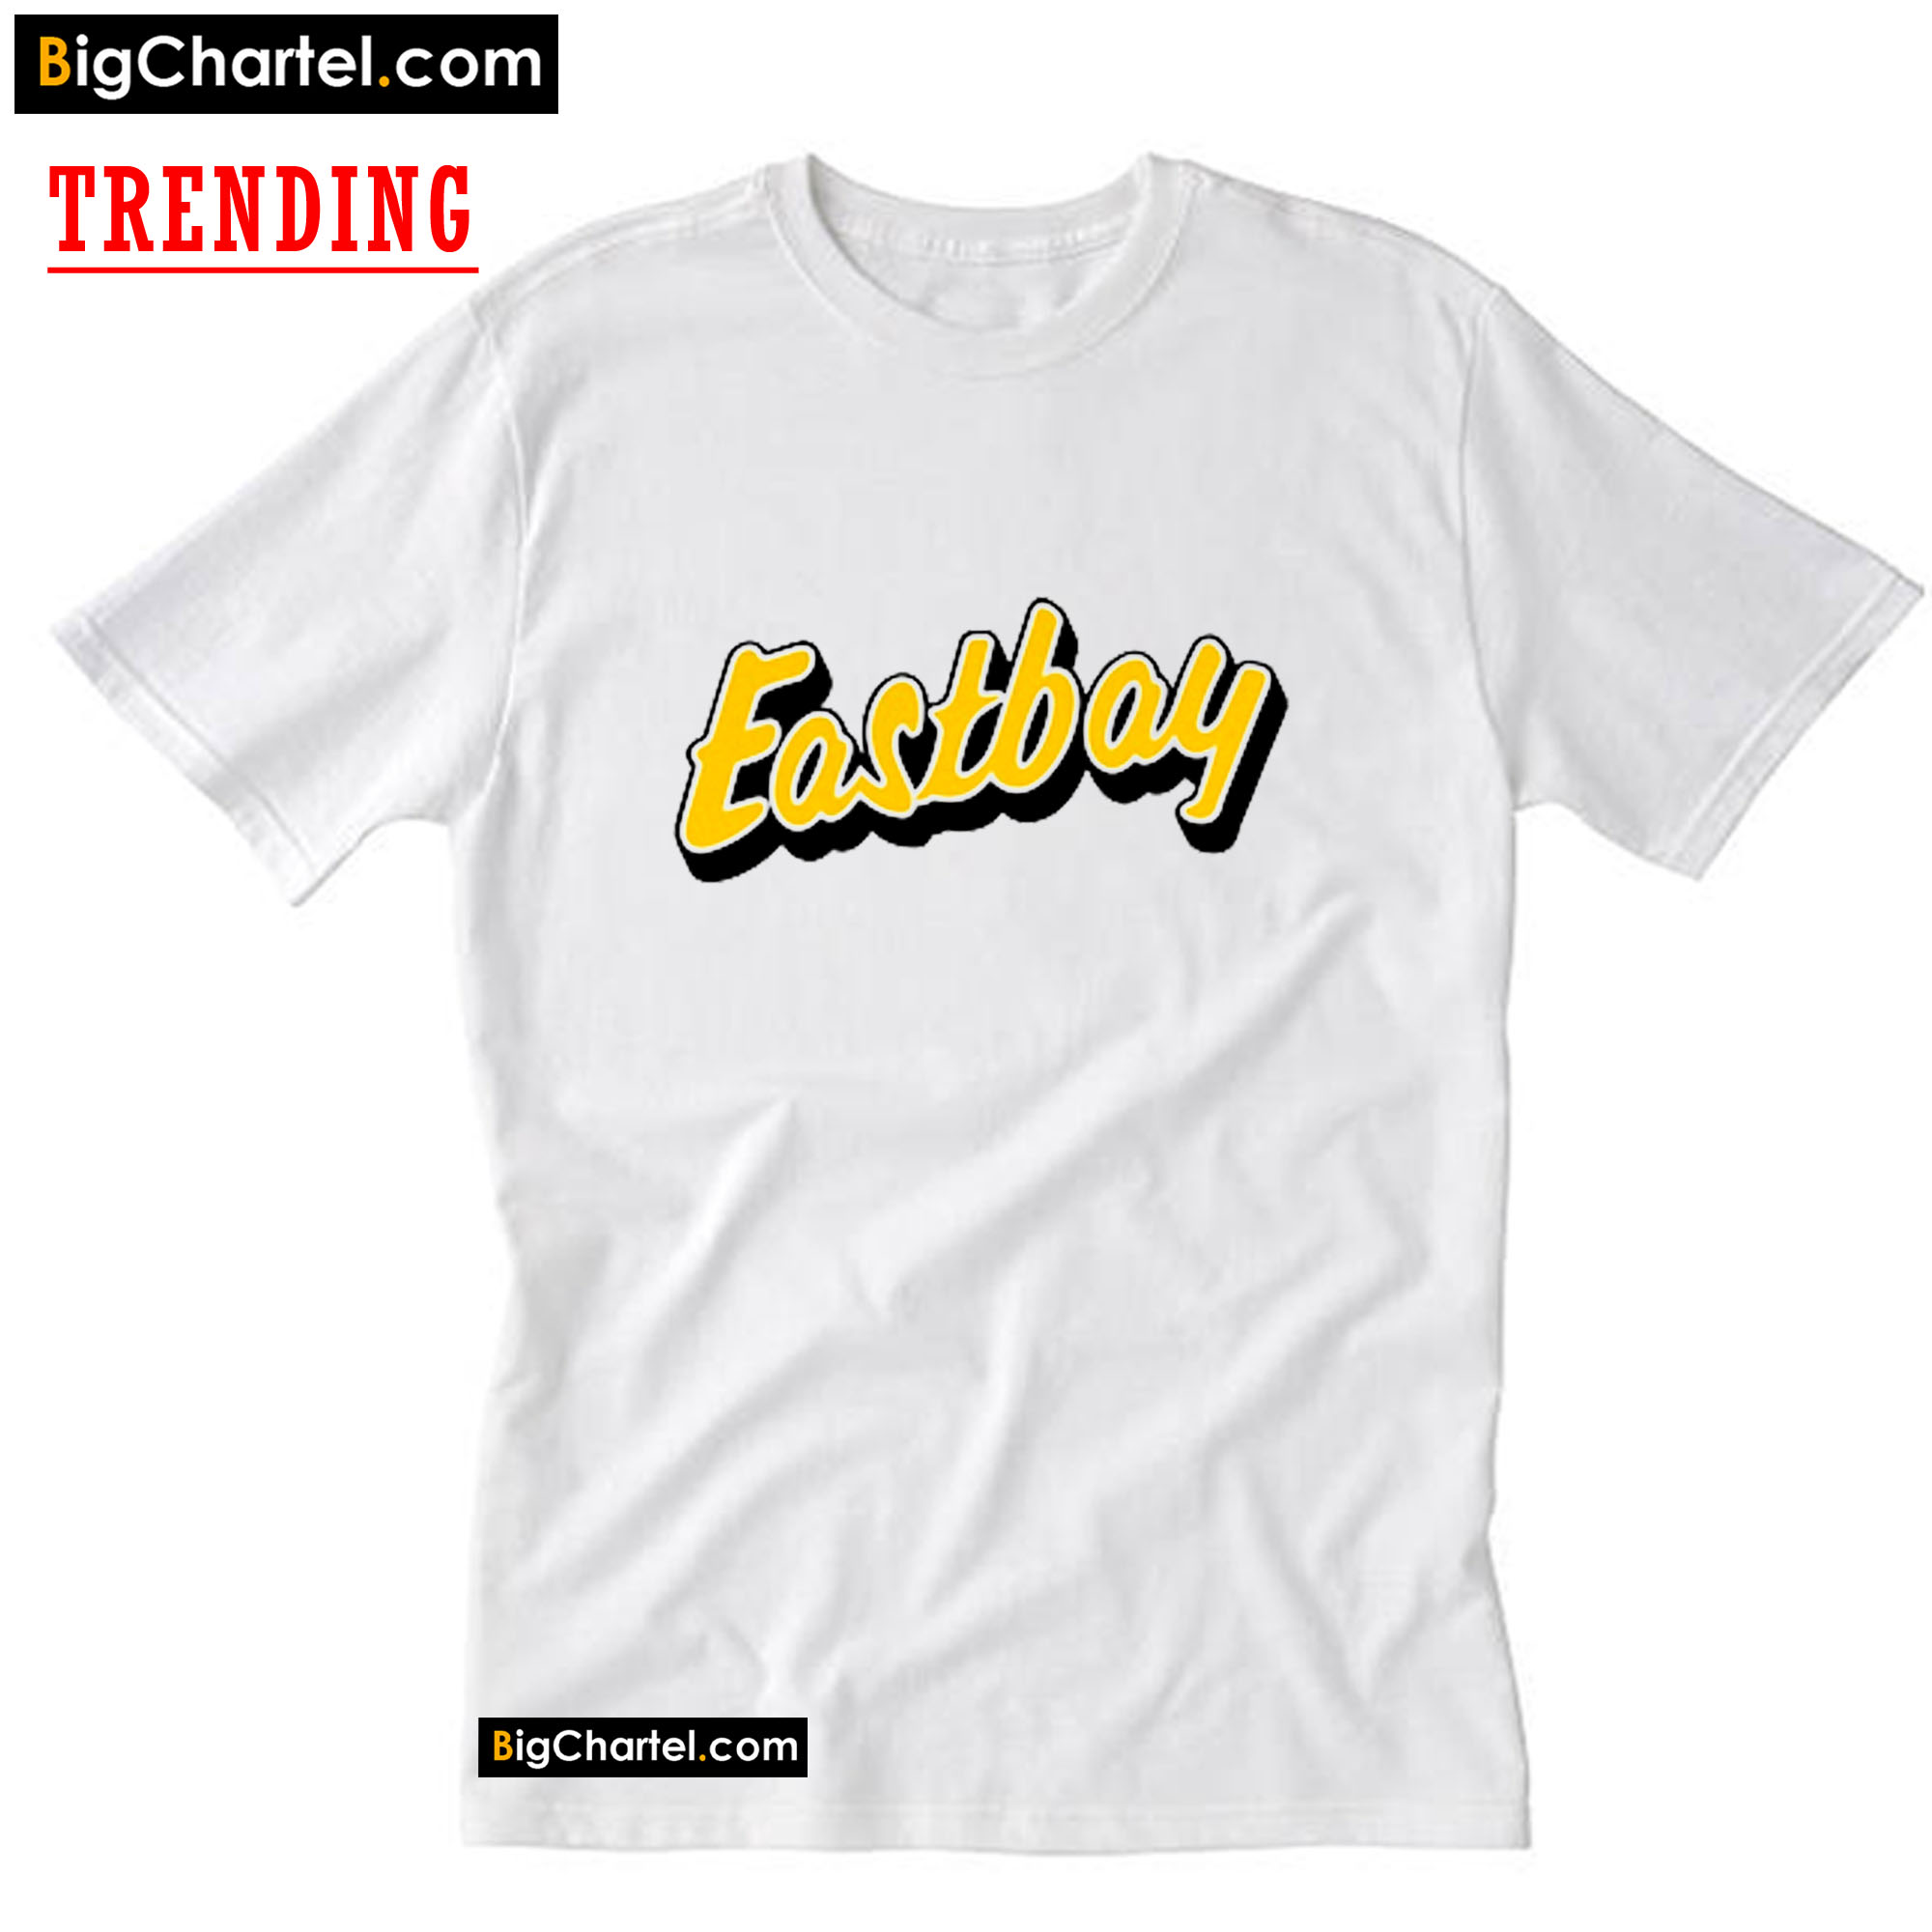 eastbay t shirts